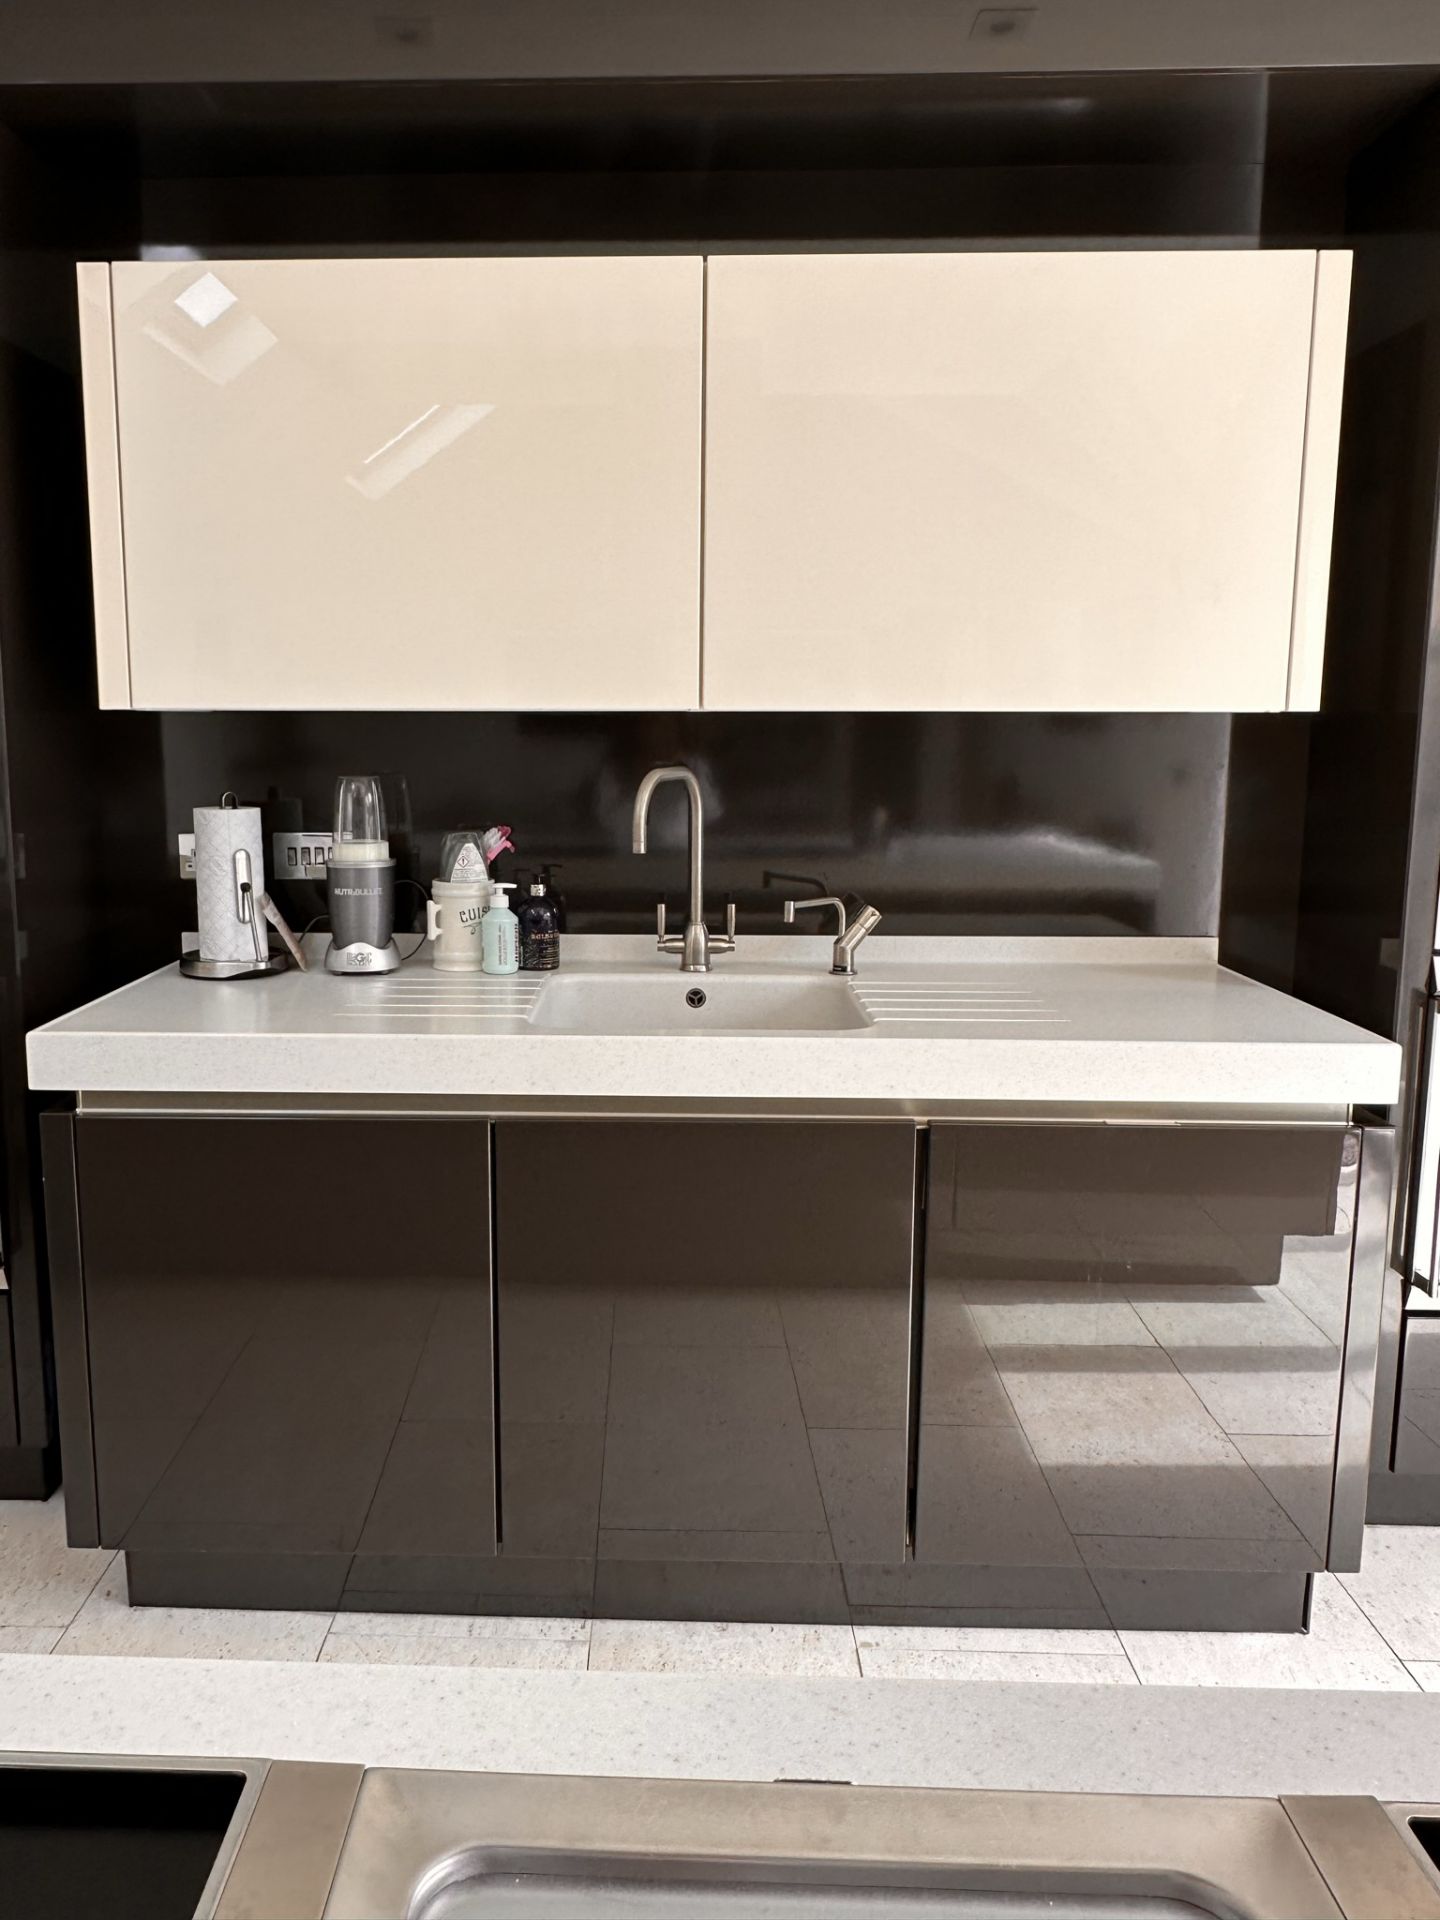 1 x Stunning Bespoke Siematic Gloss Fitted Kitchen With Corian Worktops - In Excellent Condition - - Image 44 of 94